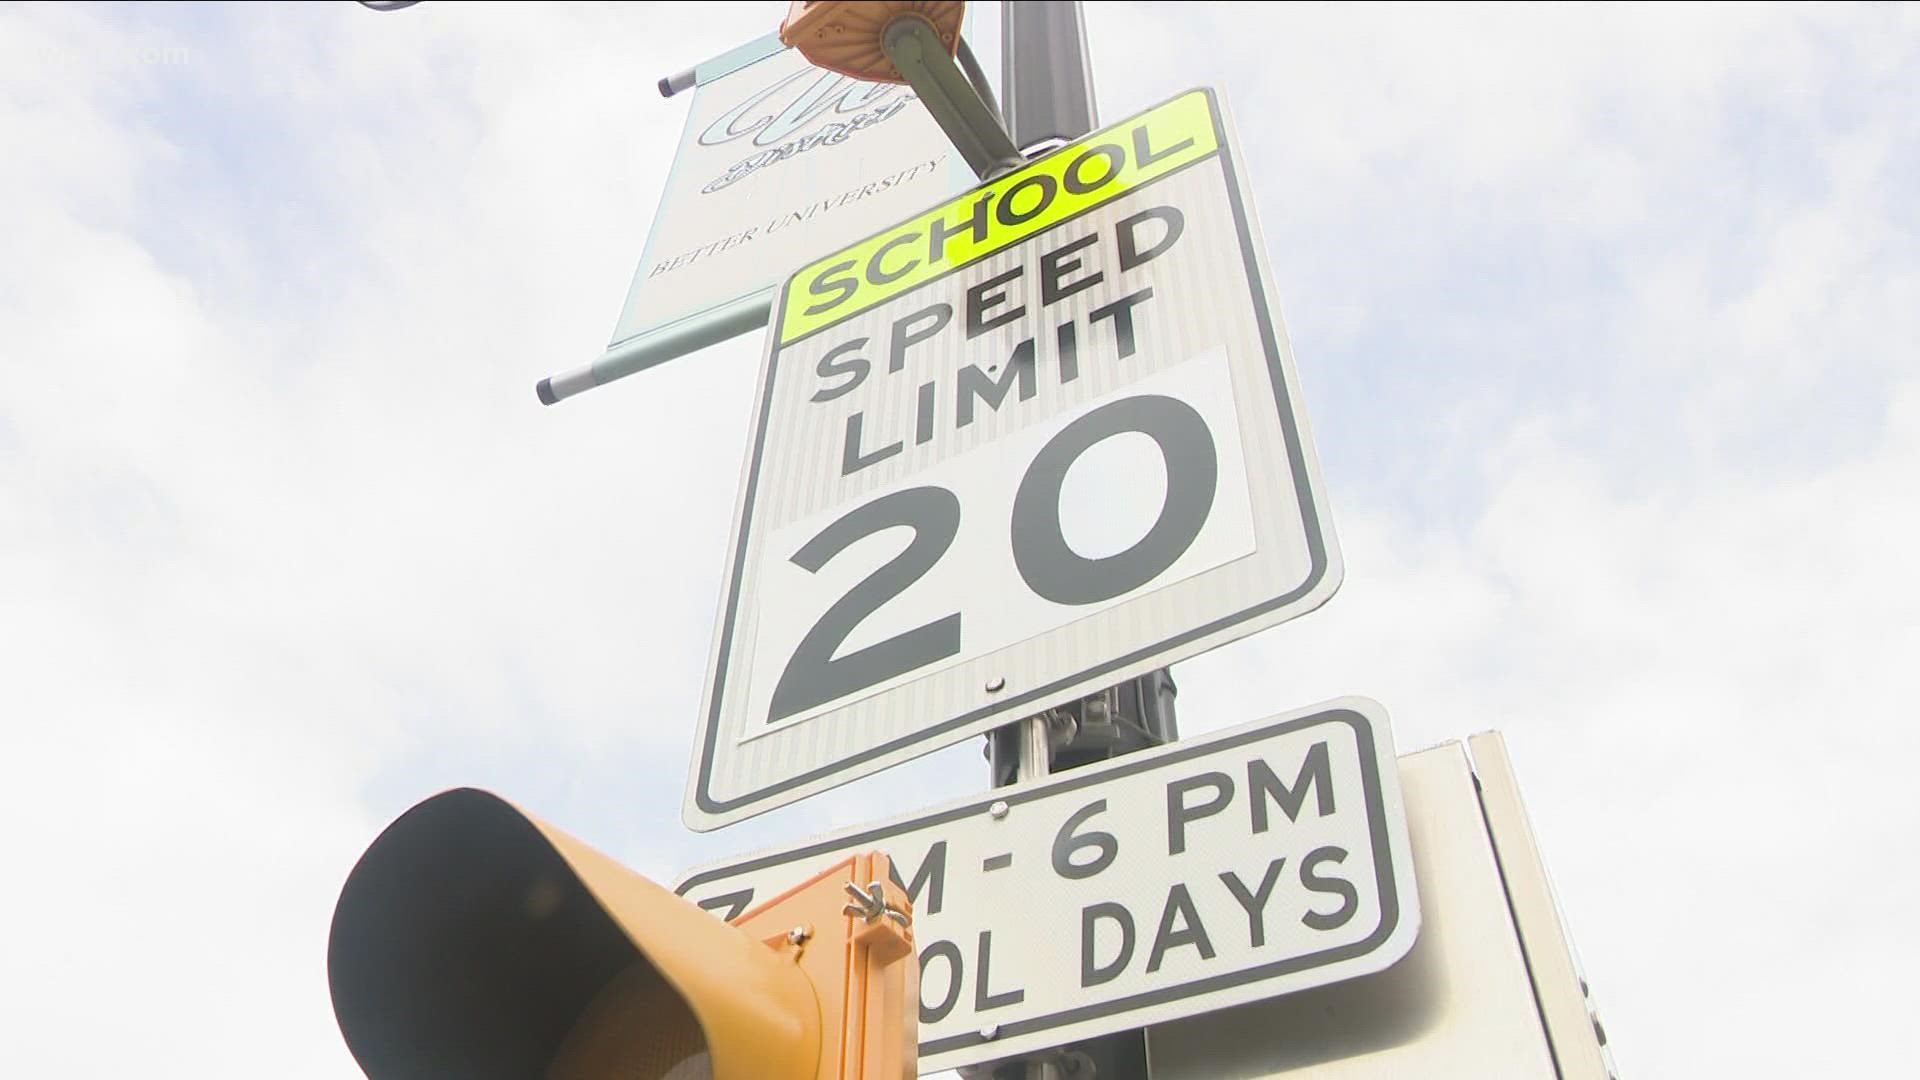 Buffalo speed zone cameras coming down